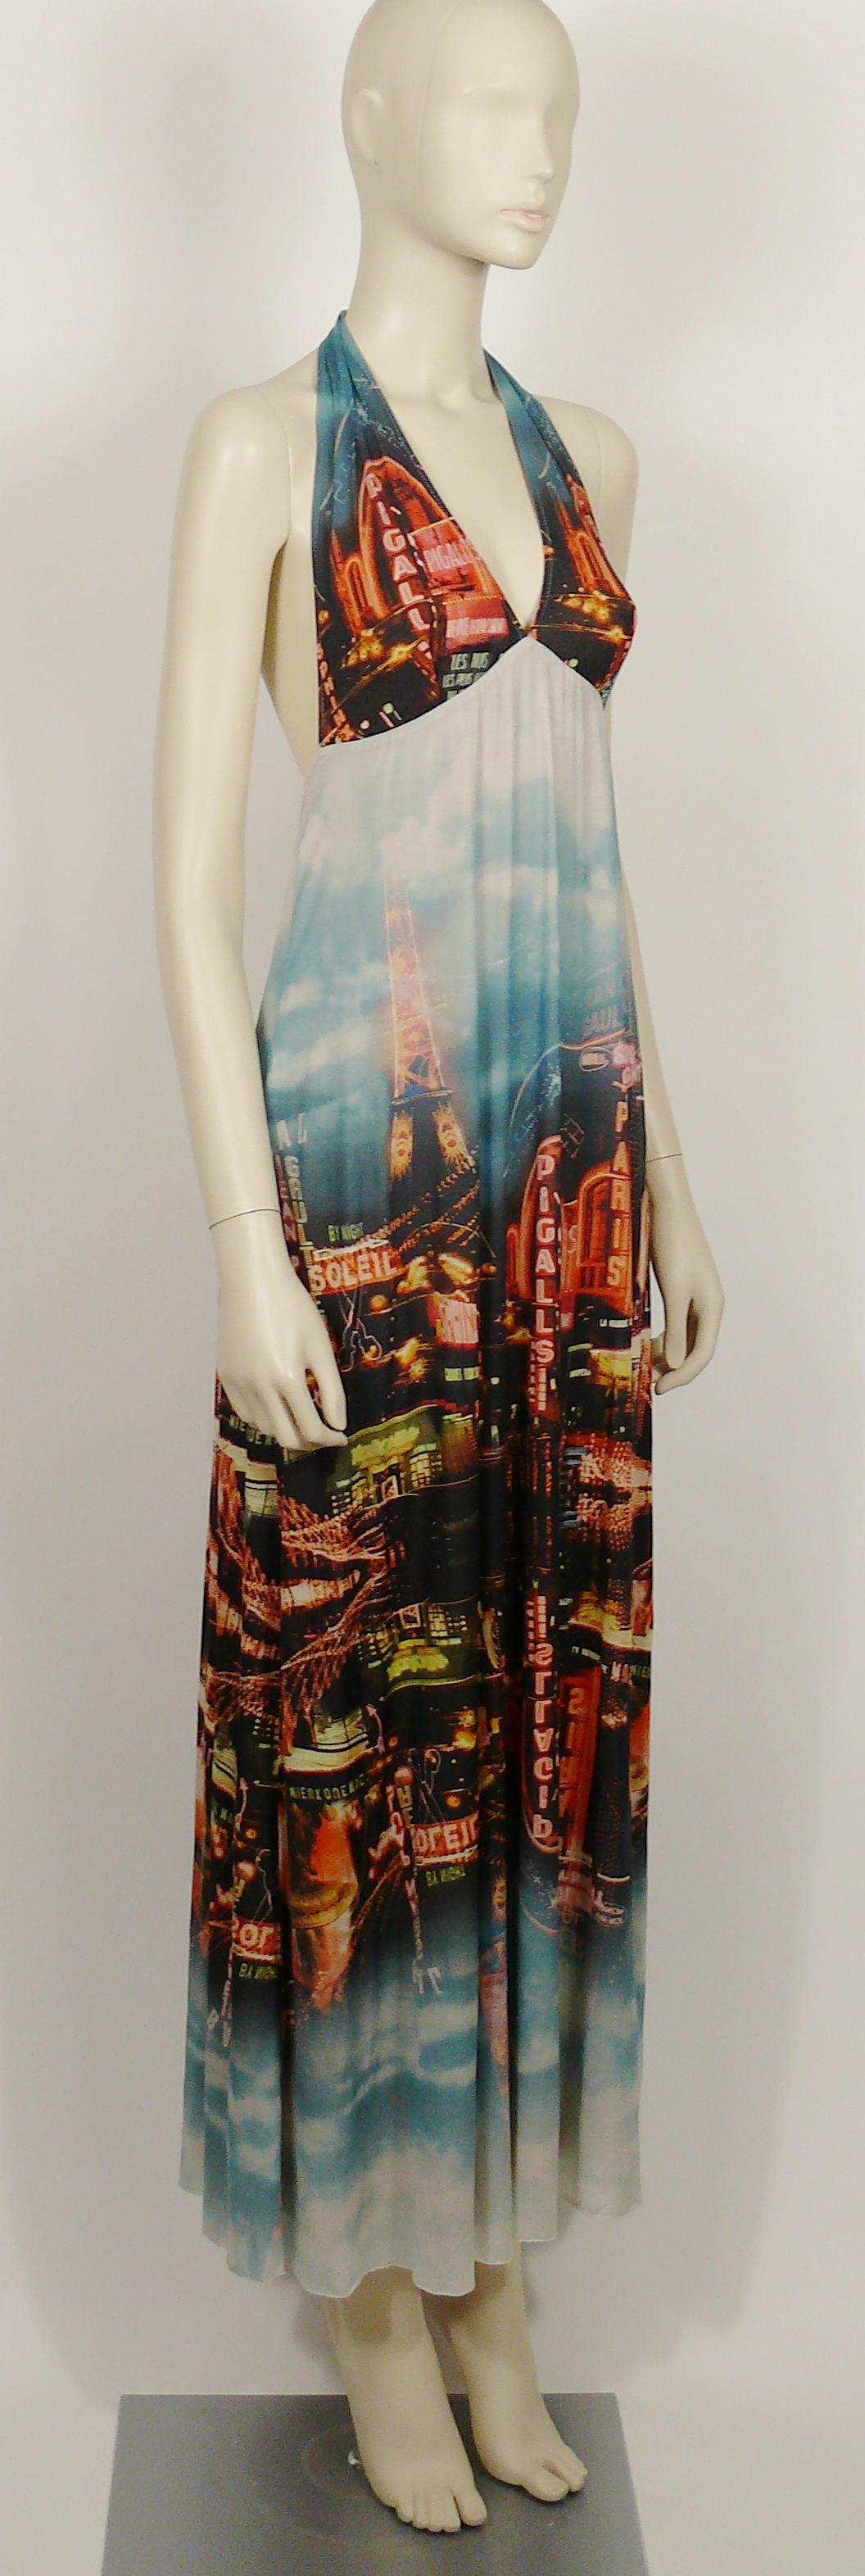 JEAN PAUL GAULTIER vintage dress featuring a gorgeous Paris by night cabarets and Eiffel Tower view print.

Slips on.
Pale pink lining.
Has stretch.

Label reads JEAN PAUL GAULTIER SOLEIL.
Made in Italy.

Size label reads : M.
Please refer to